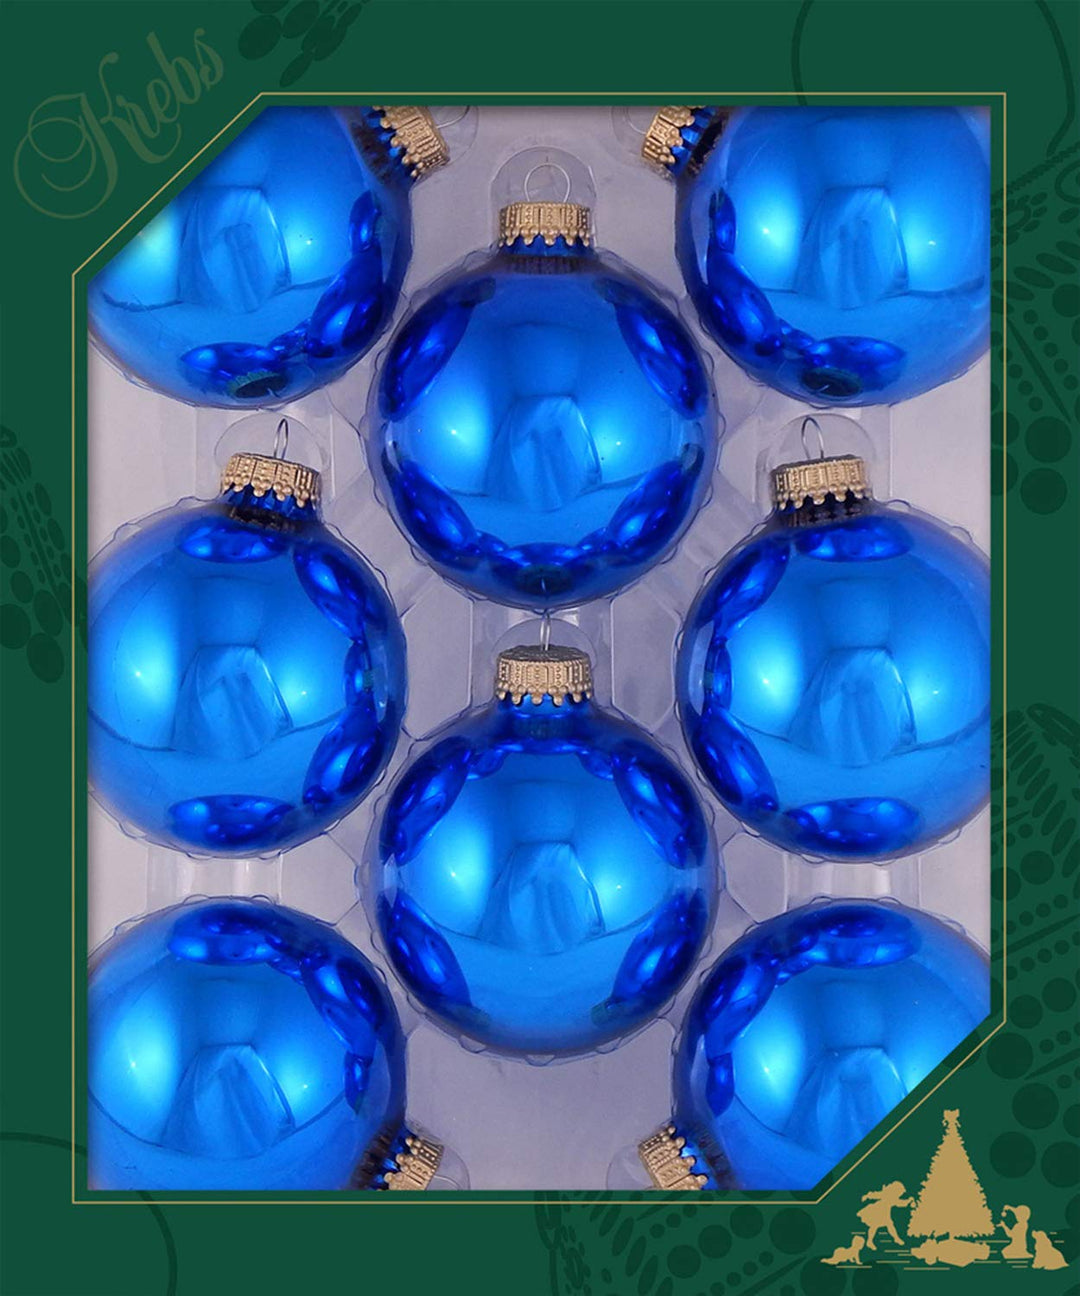 Glass Christmas Tree Ornaments - 67mm / 2.63" [8 Pieces] Designer Balls from Christmas By Krebs Seamless Hanging Holiday Decor (Shiny Classic Blue)